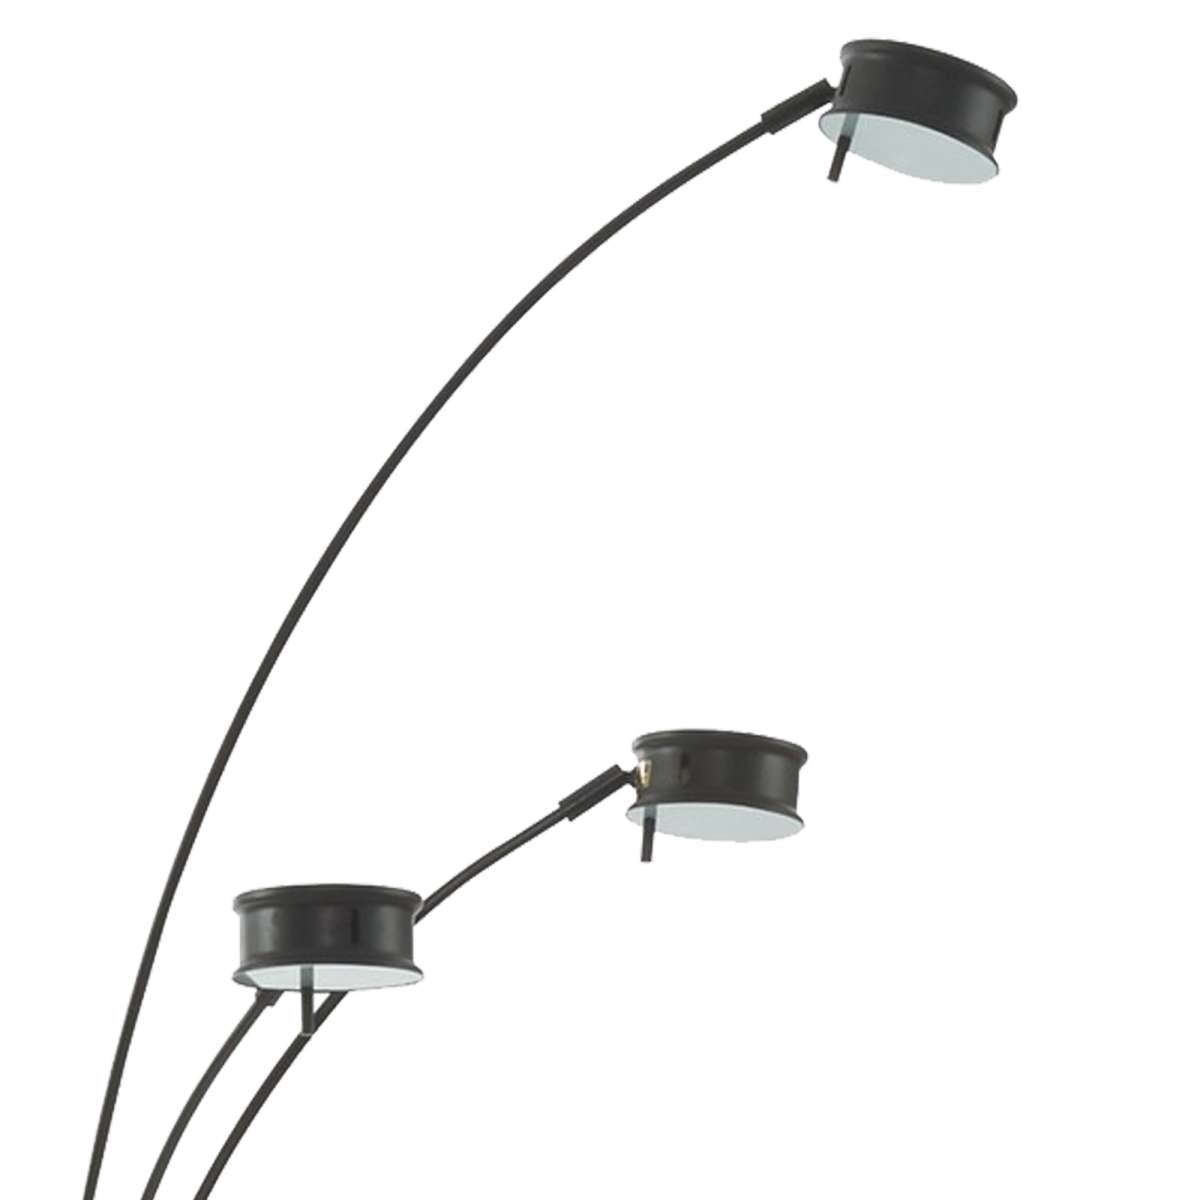 5 Light Metal Arc Lamp With Diffuser And Dimmer Switch, Black By Benzara